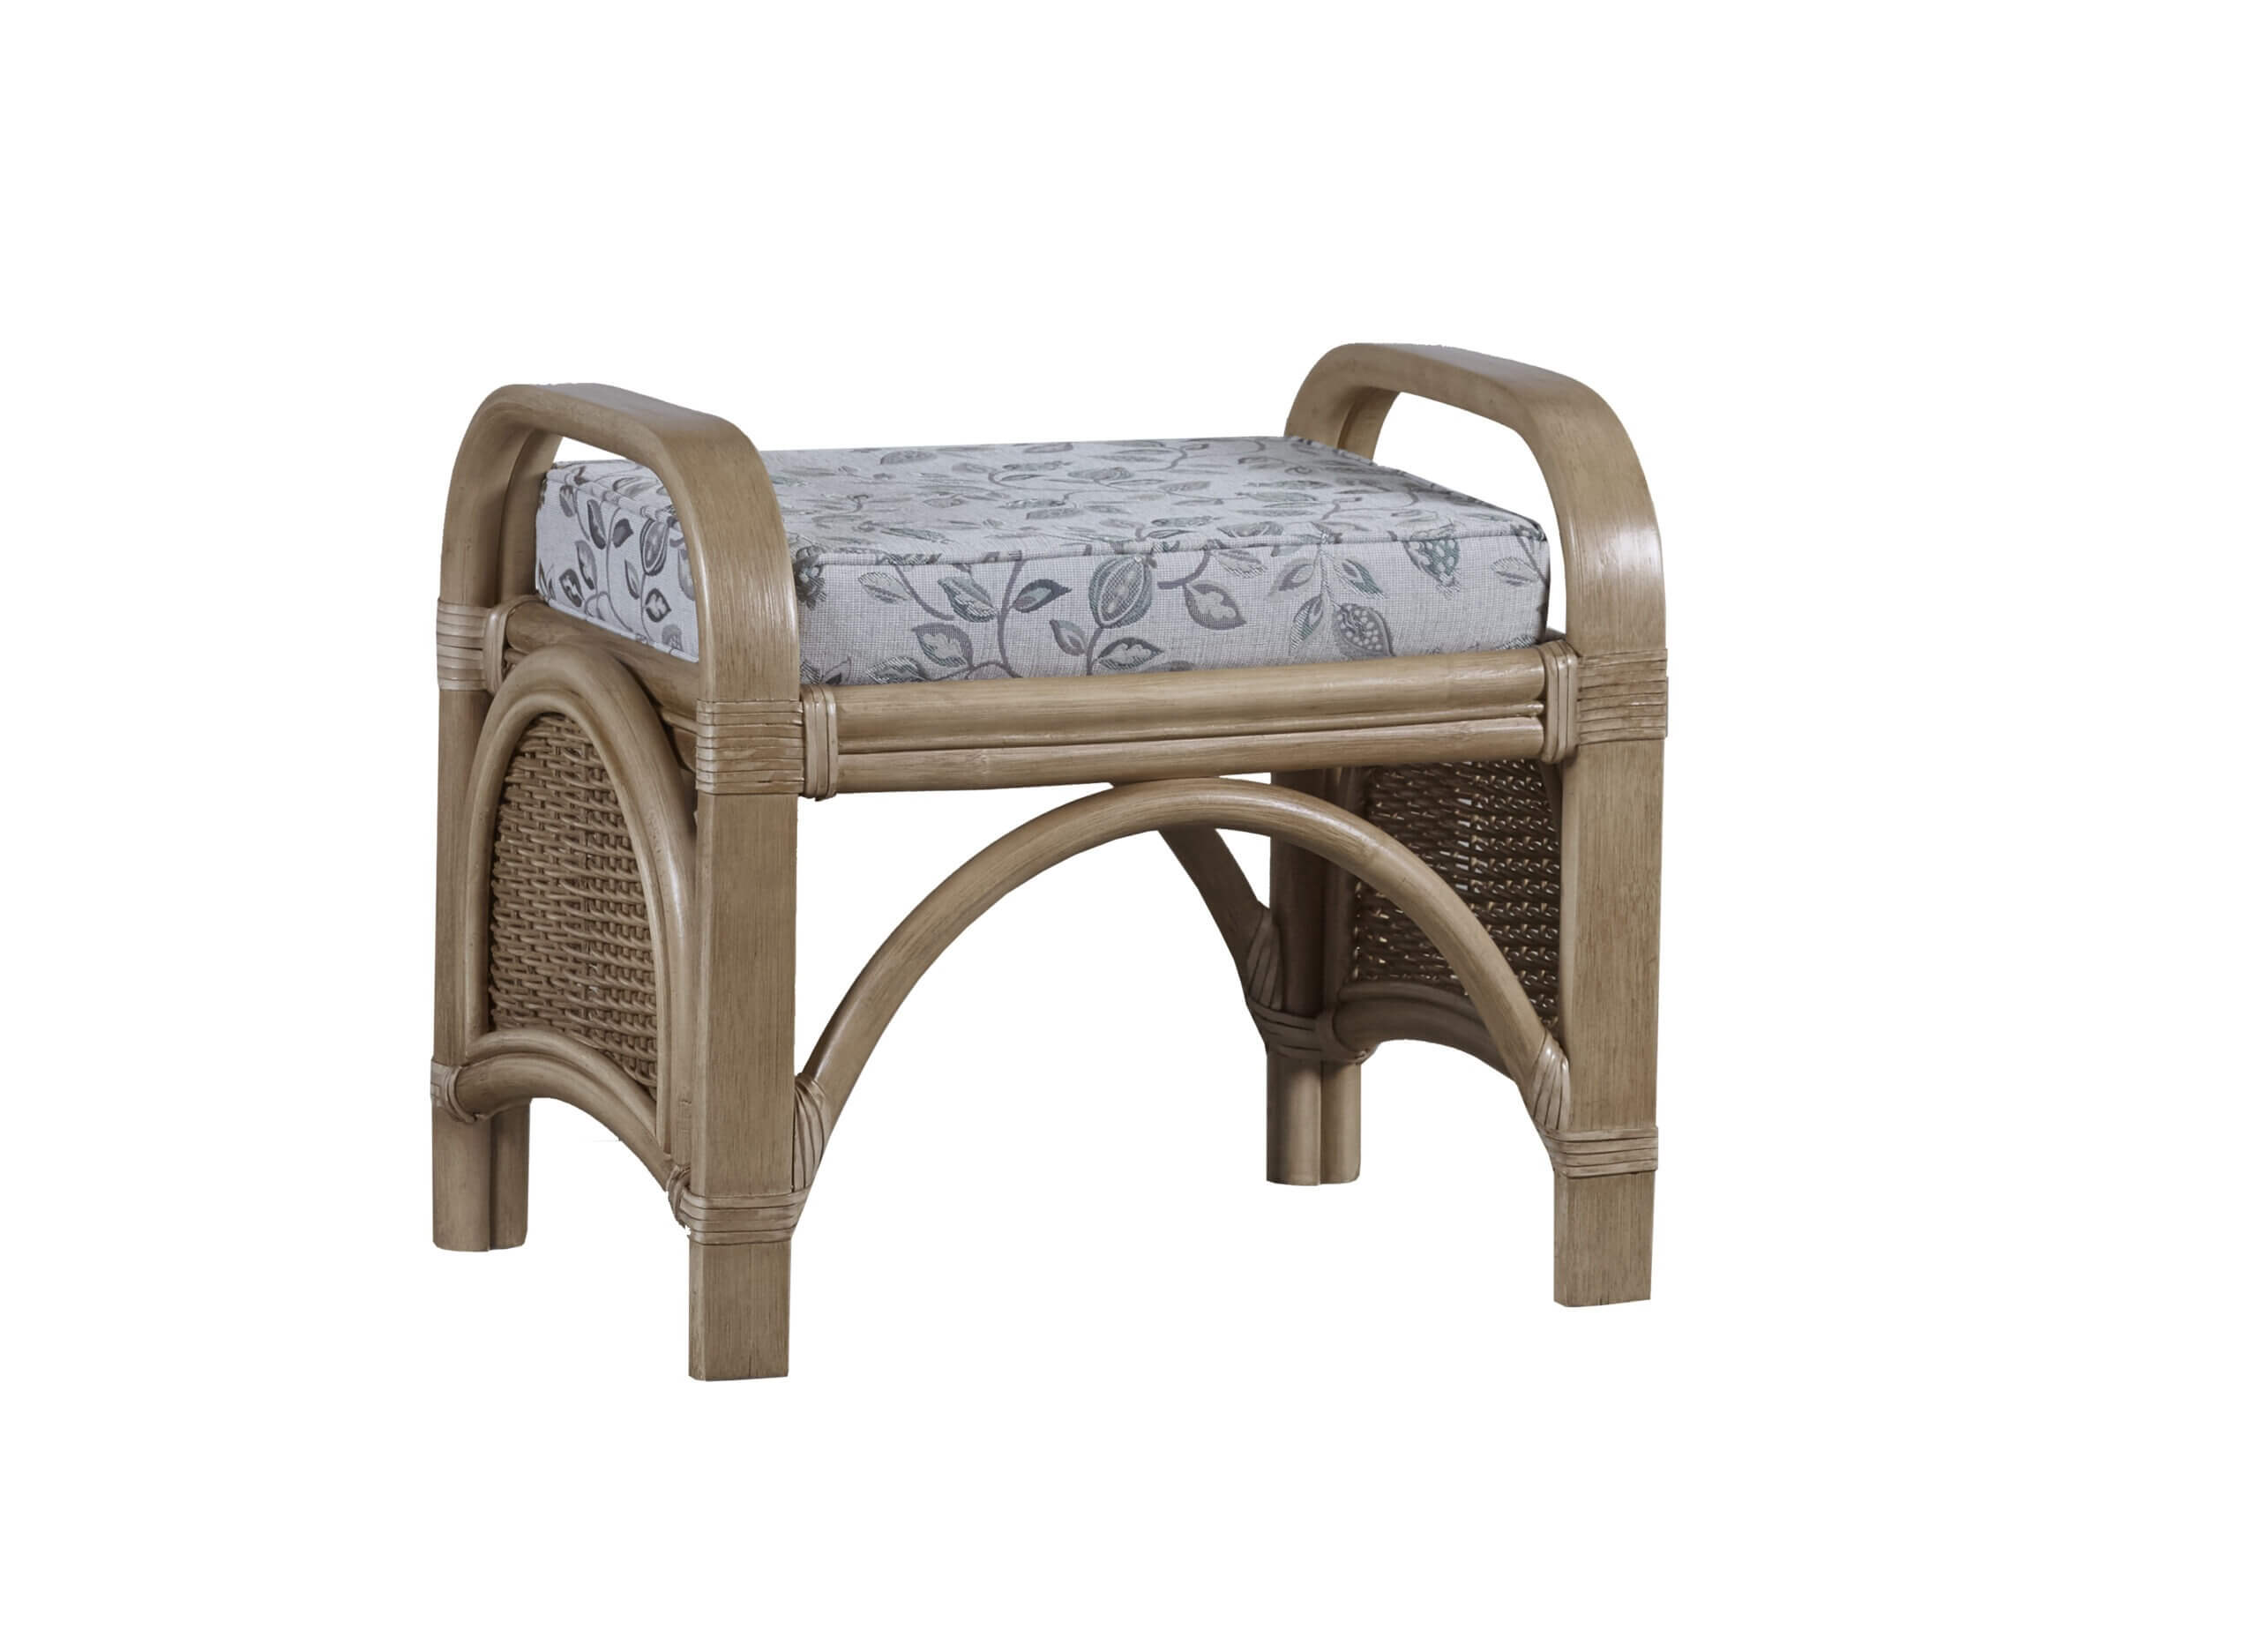 Showing image for Bari footstool